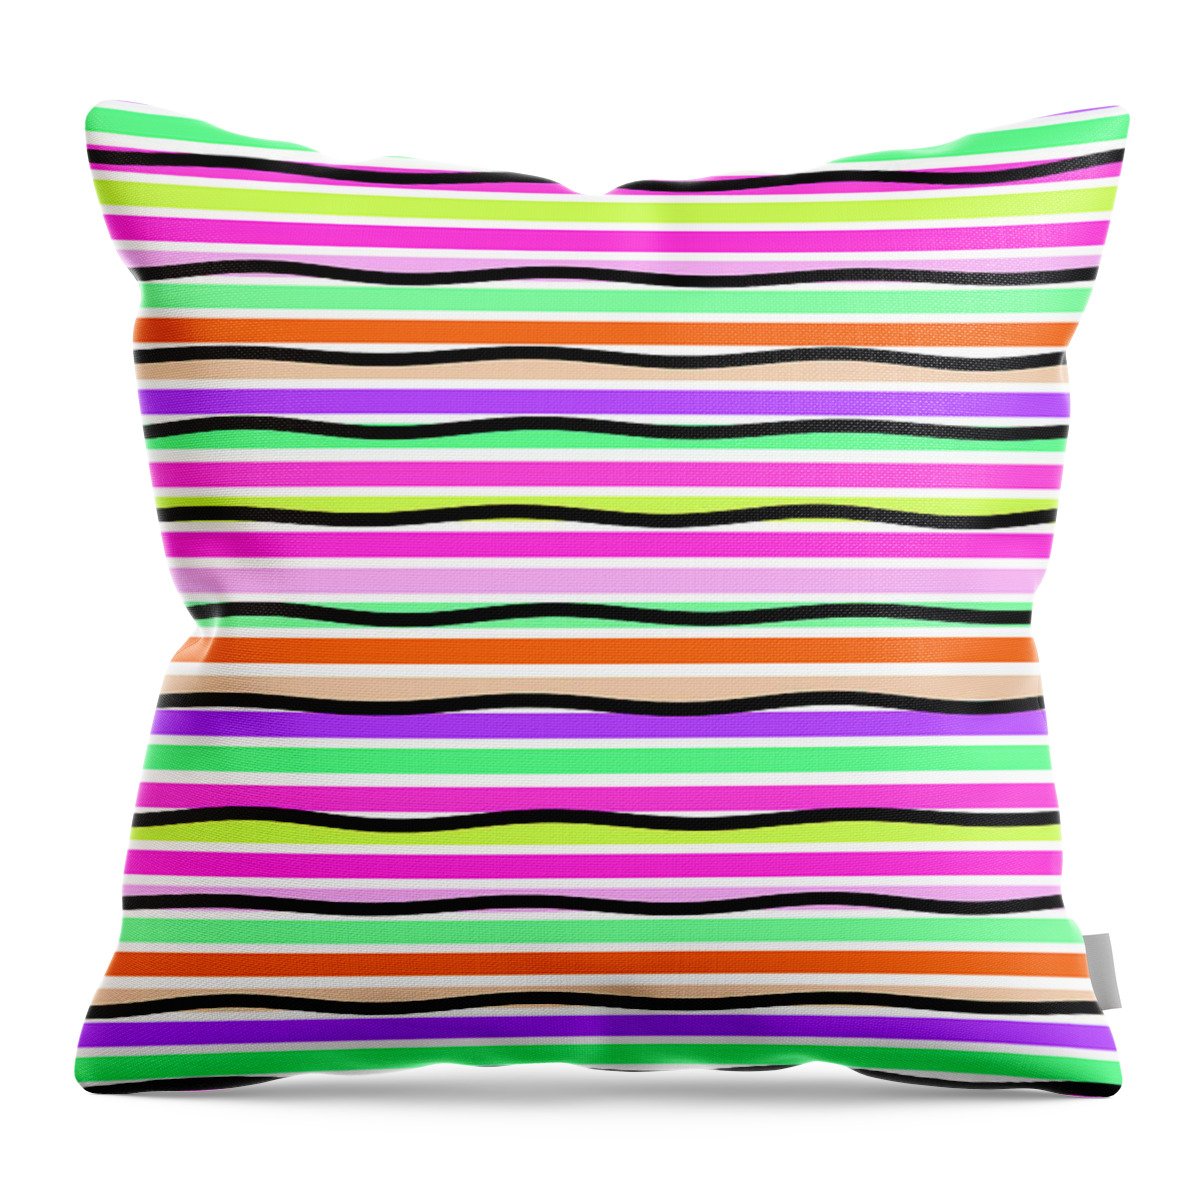 Stripes Throw Pillow featuring the digital art Stripes by Louisa Knight